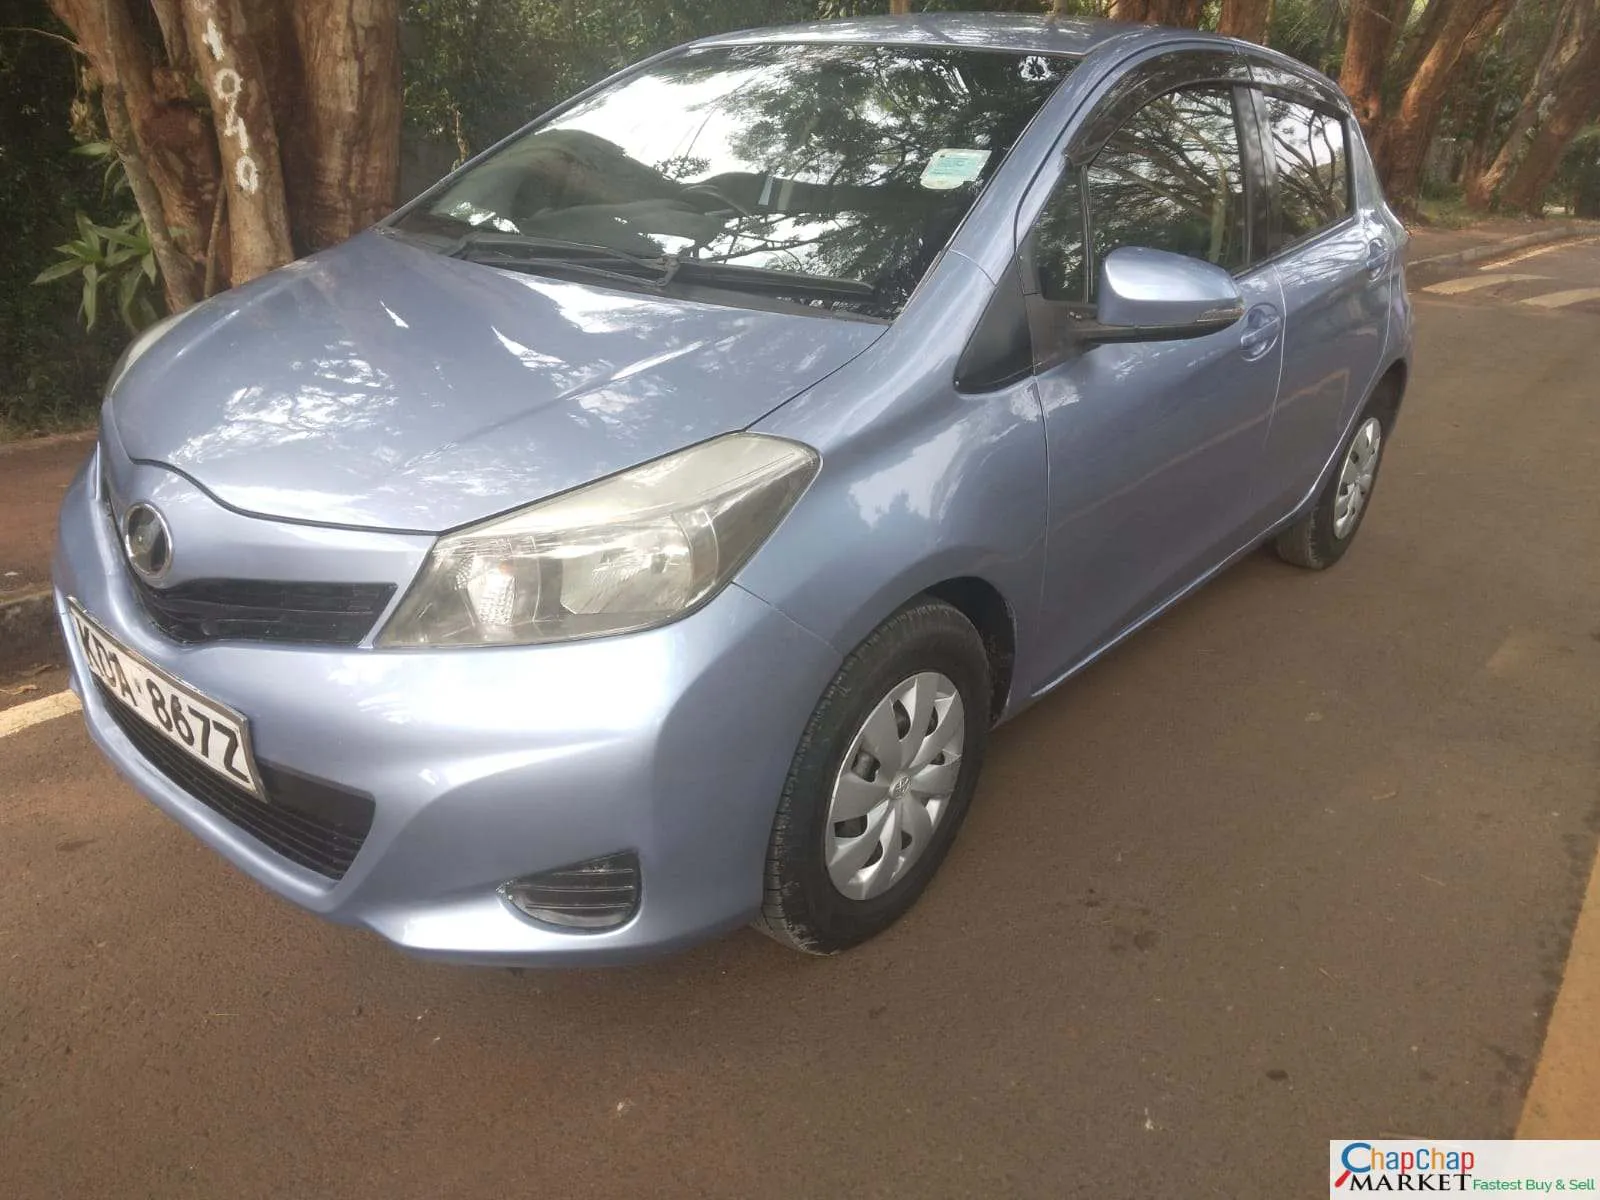 Toyota Vitz 1300cc for sale in Kenya 🔥 You Pay 30% Deposit Trade in OK EXCLUSIVE